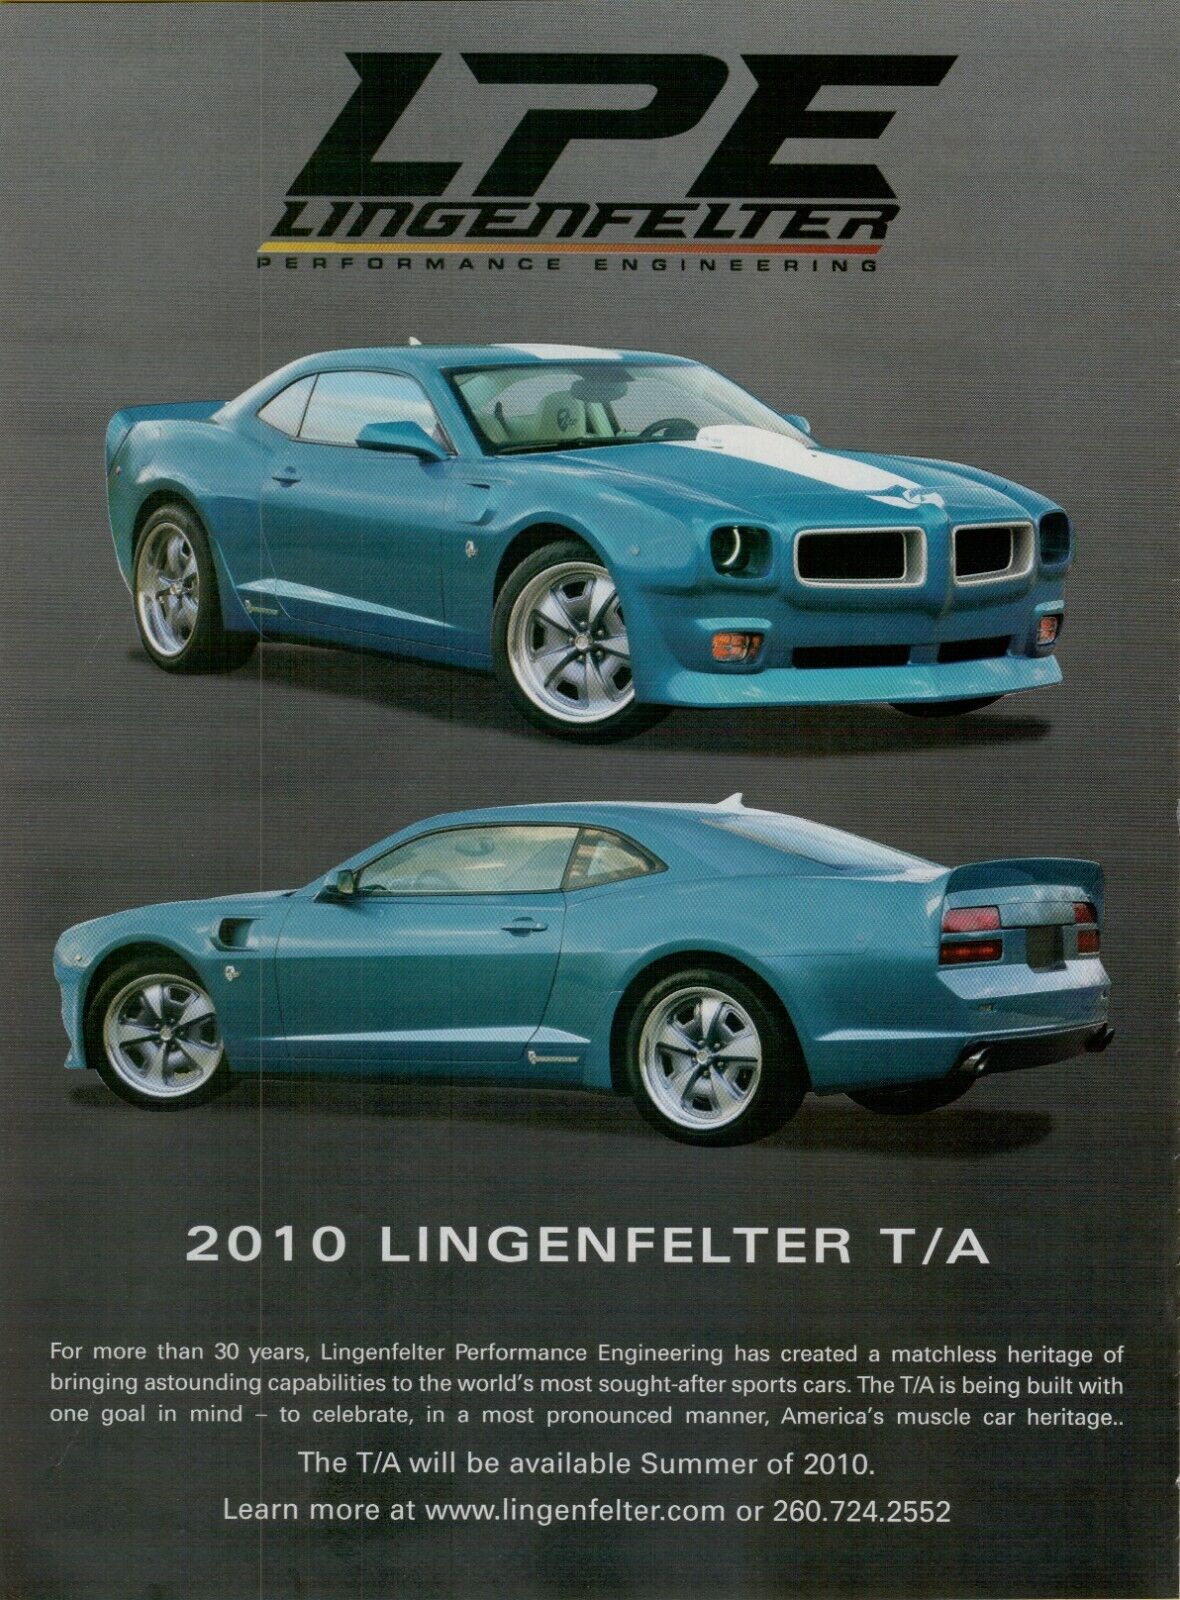 2010 Lingenfelter T/A Muscle Car Performance Engineering Camaro VINTAGE PRINT AD